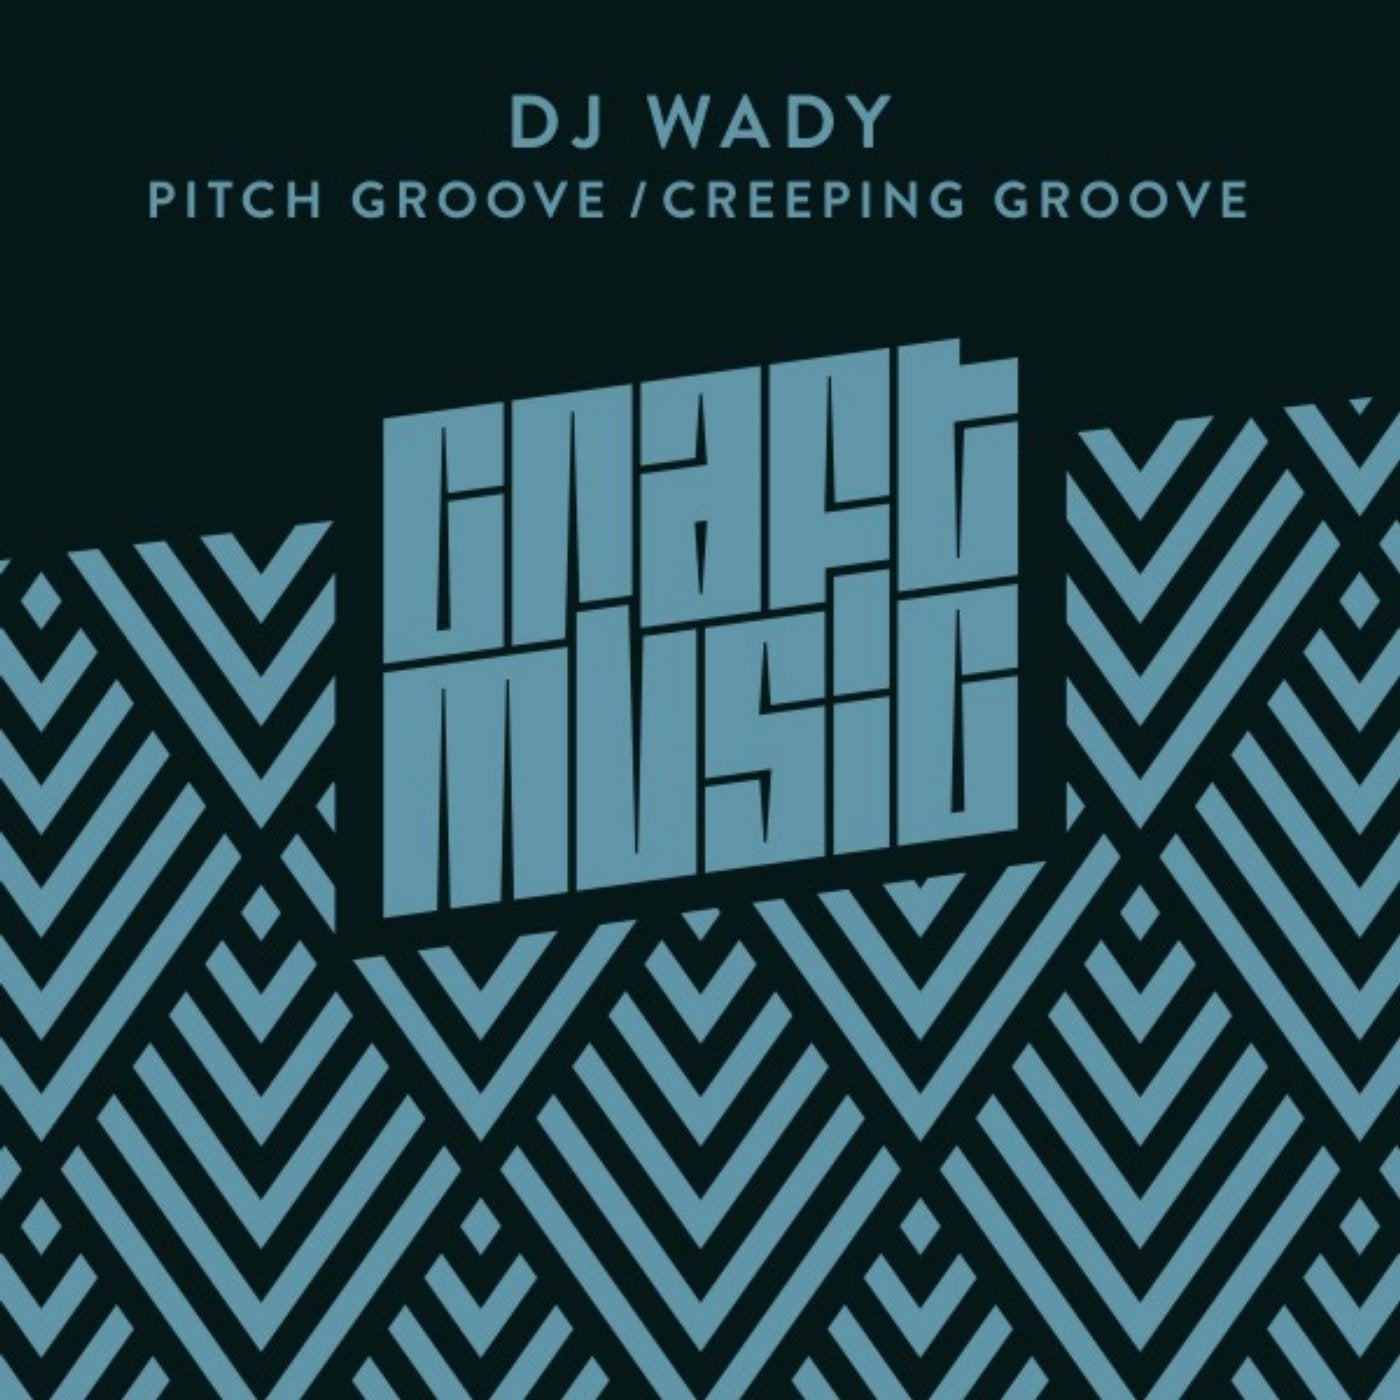 Pitch Groove / Creeping Groove